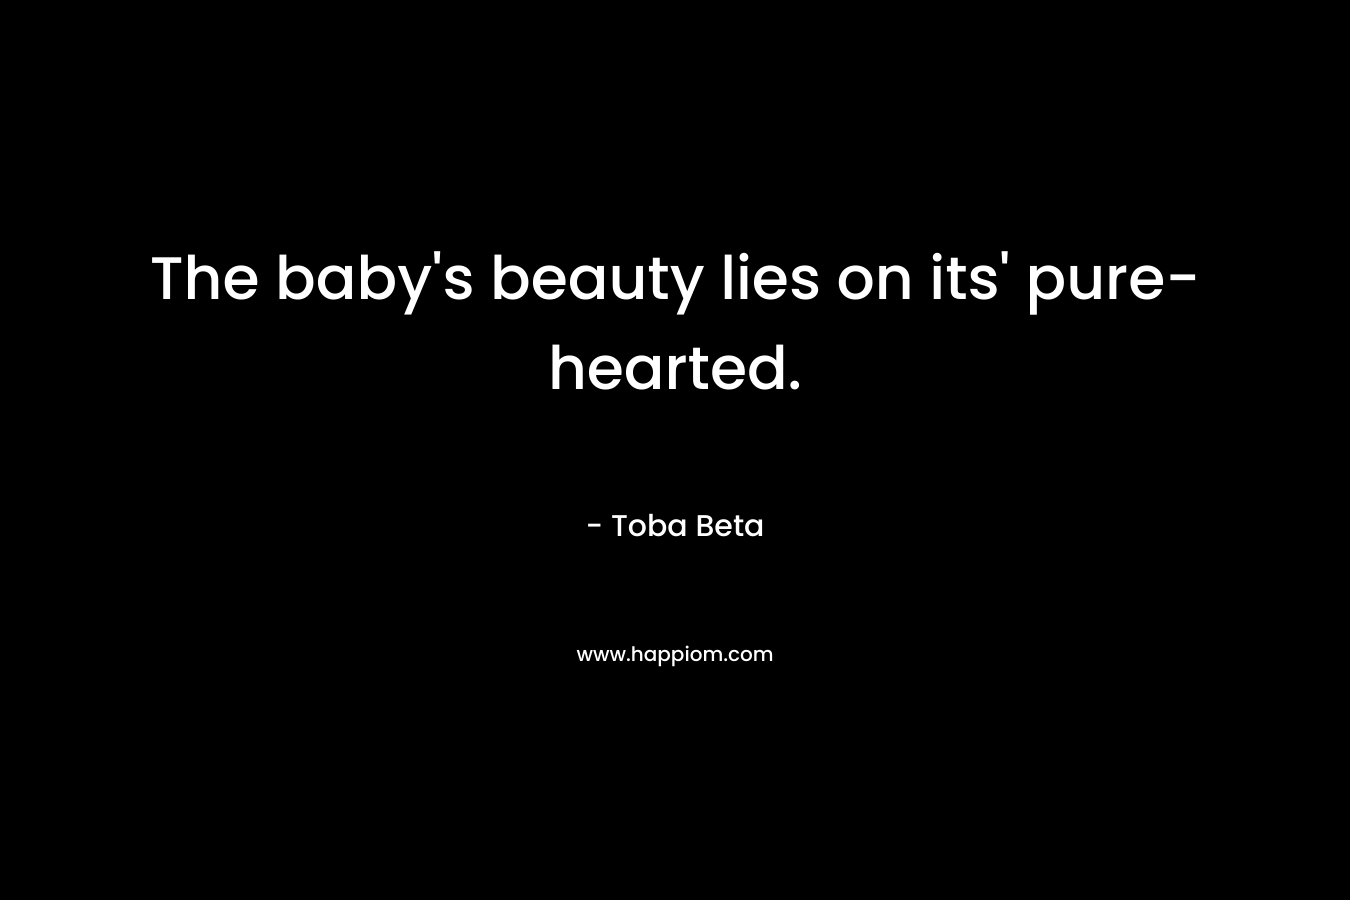 The baby’s beauty lies on its’ pure-hearted. – Toba Beta